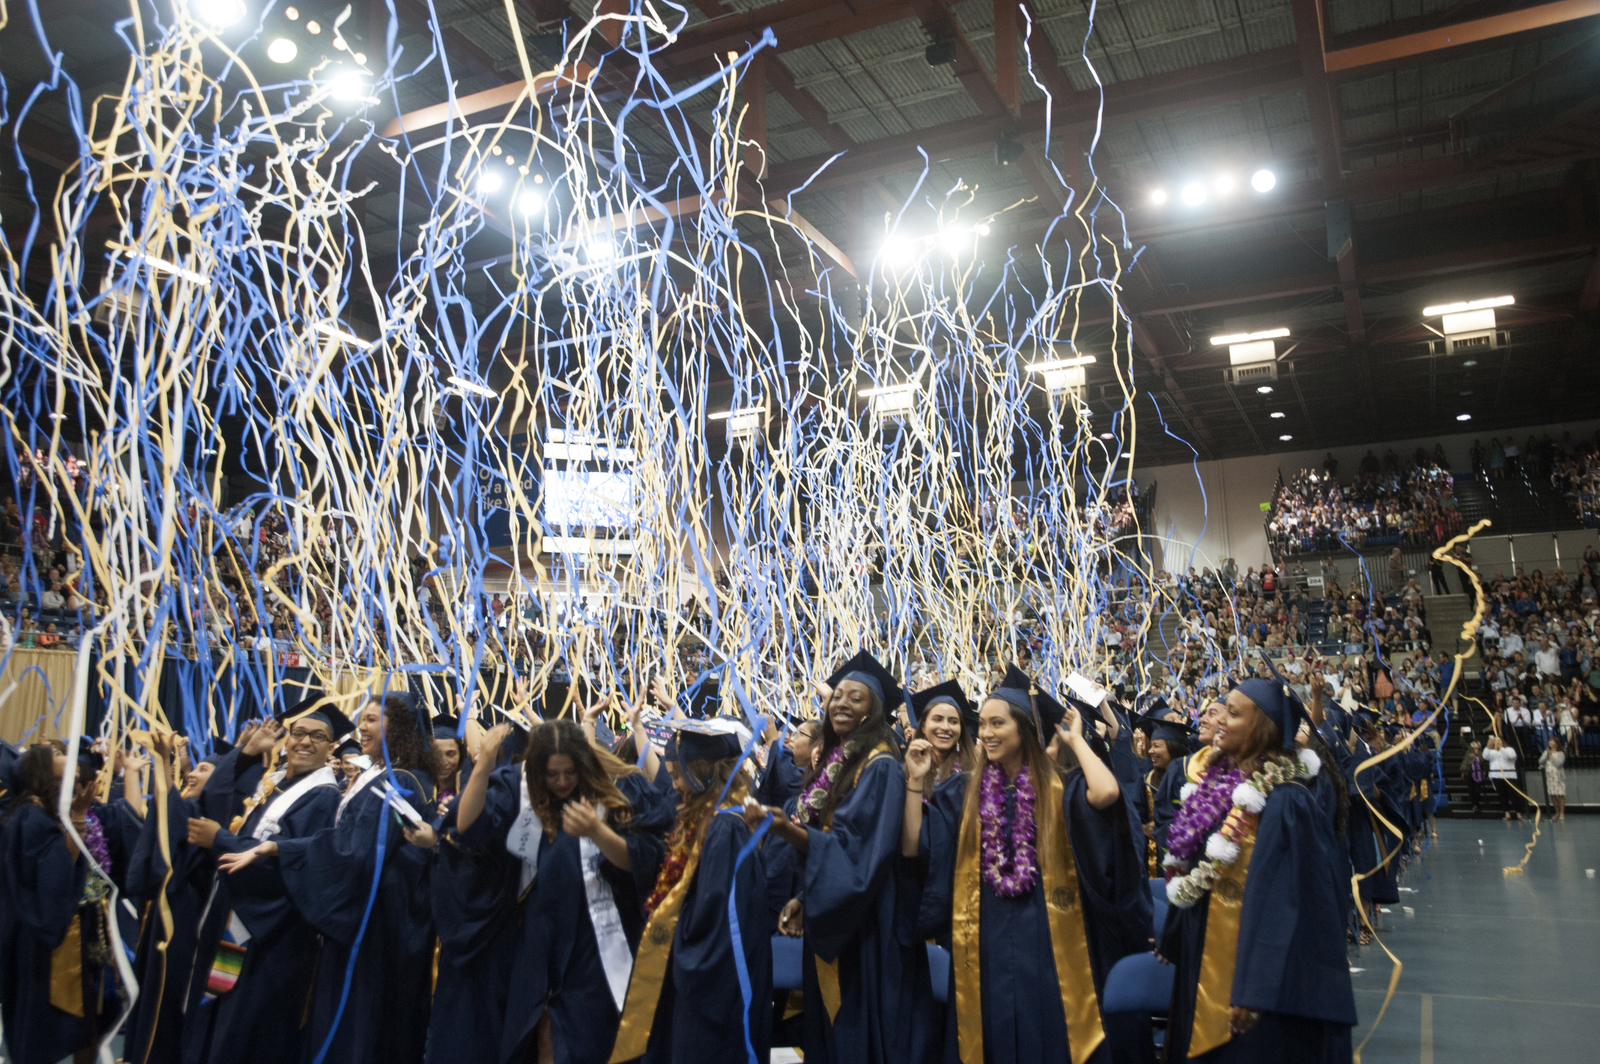 Streamers fall during a UC Davis commencement ceremony.